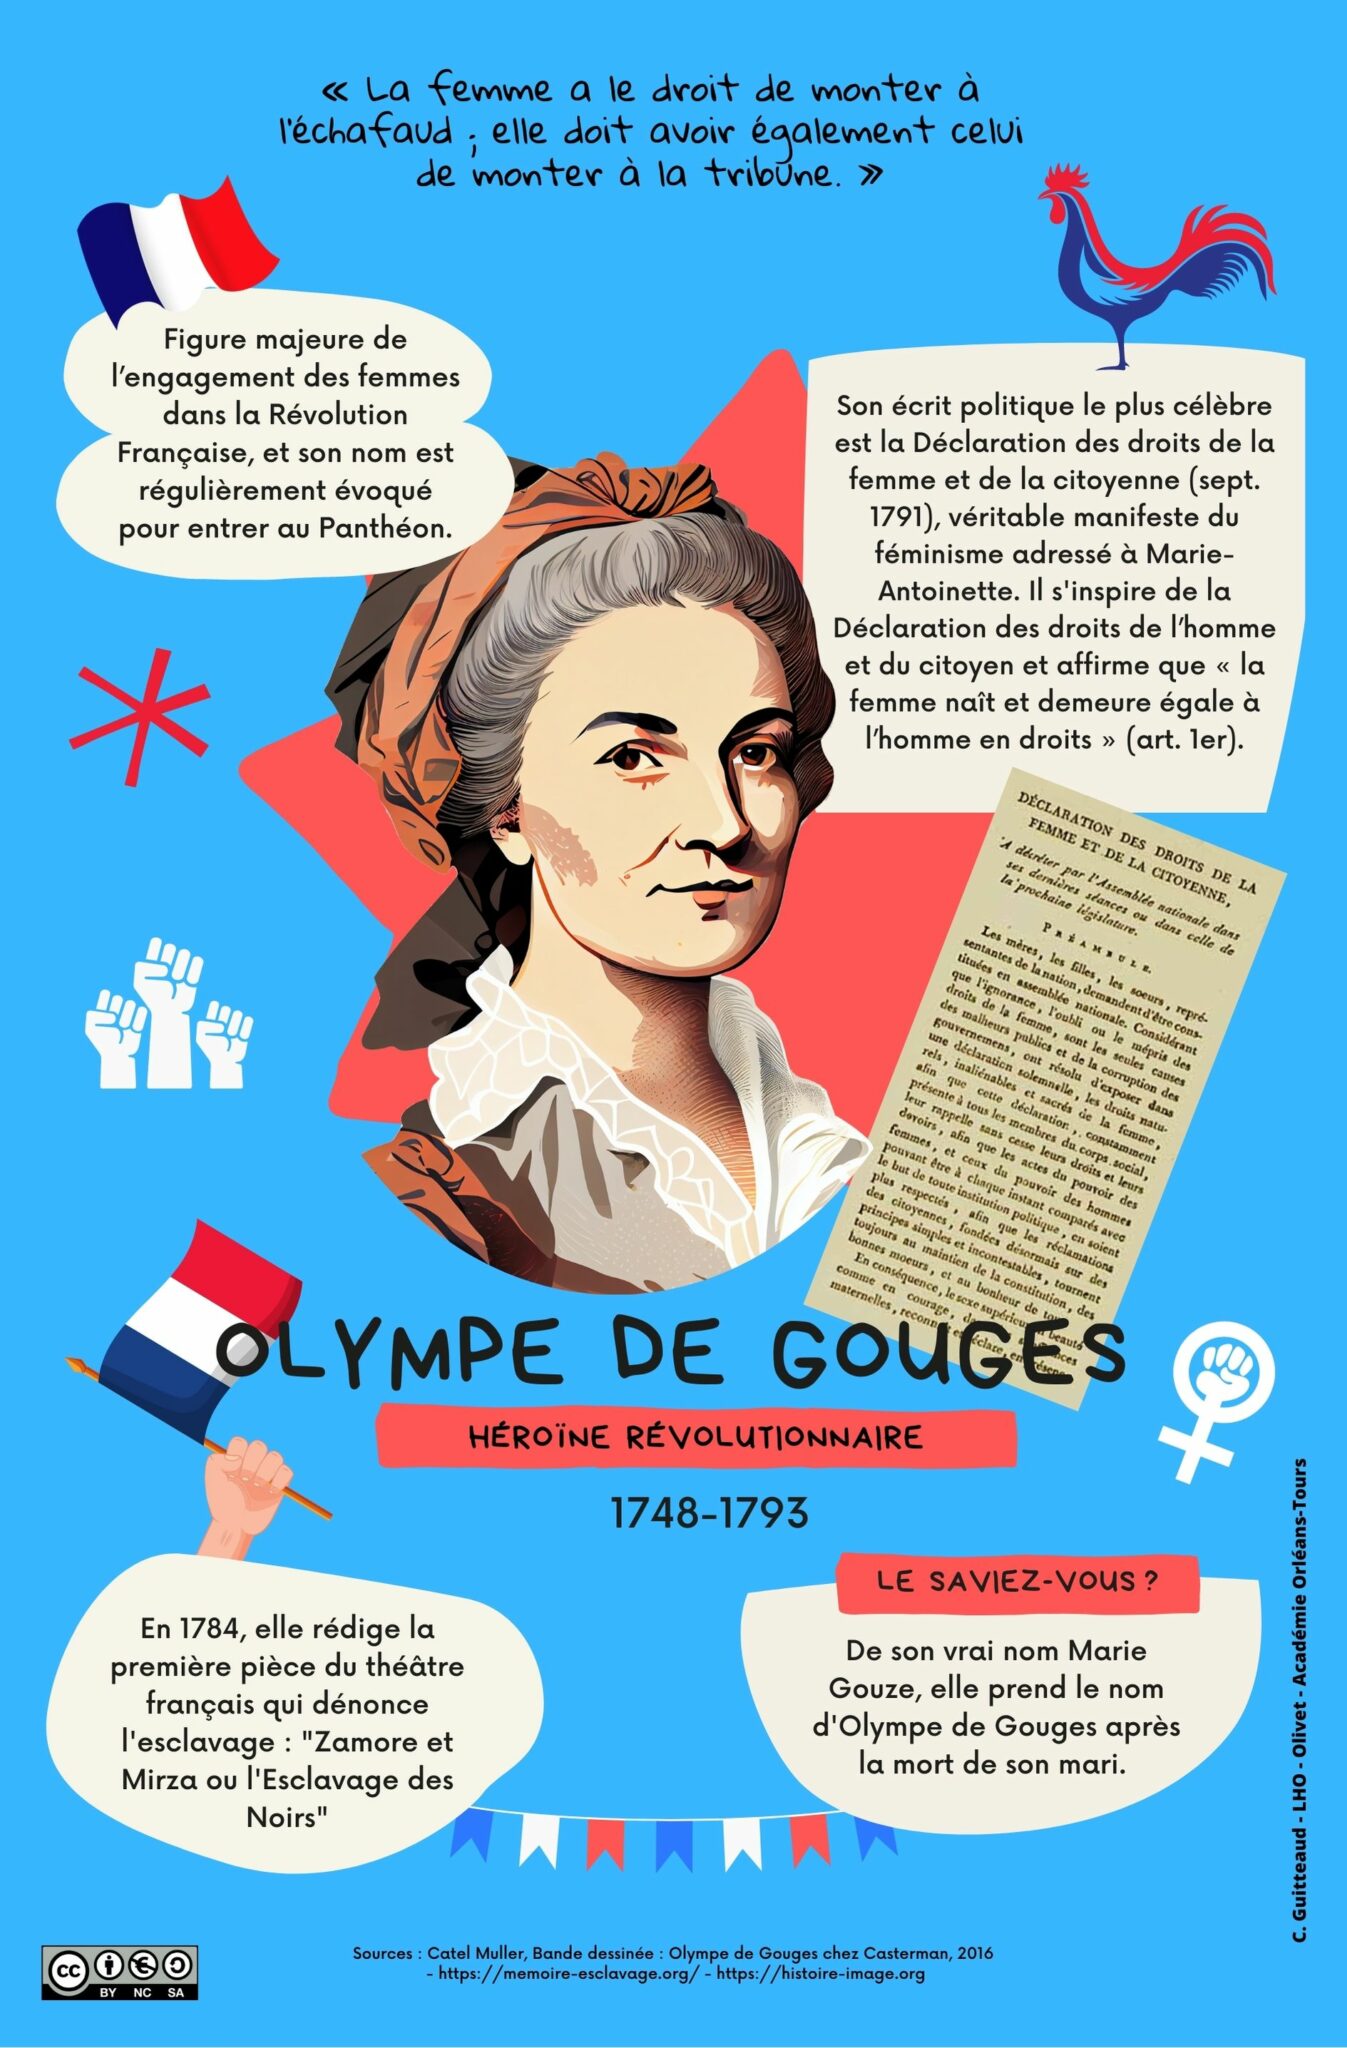 PORTRAIT OLYMPE DE GOUGES scaled 2 scaled